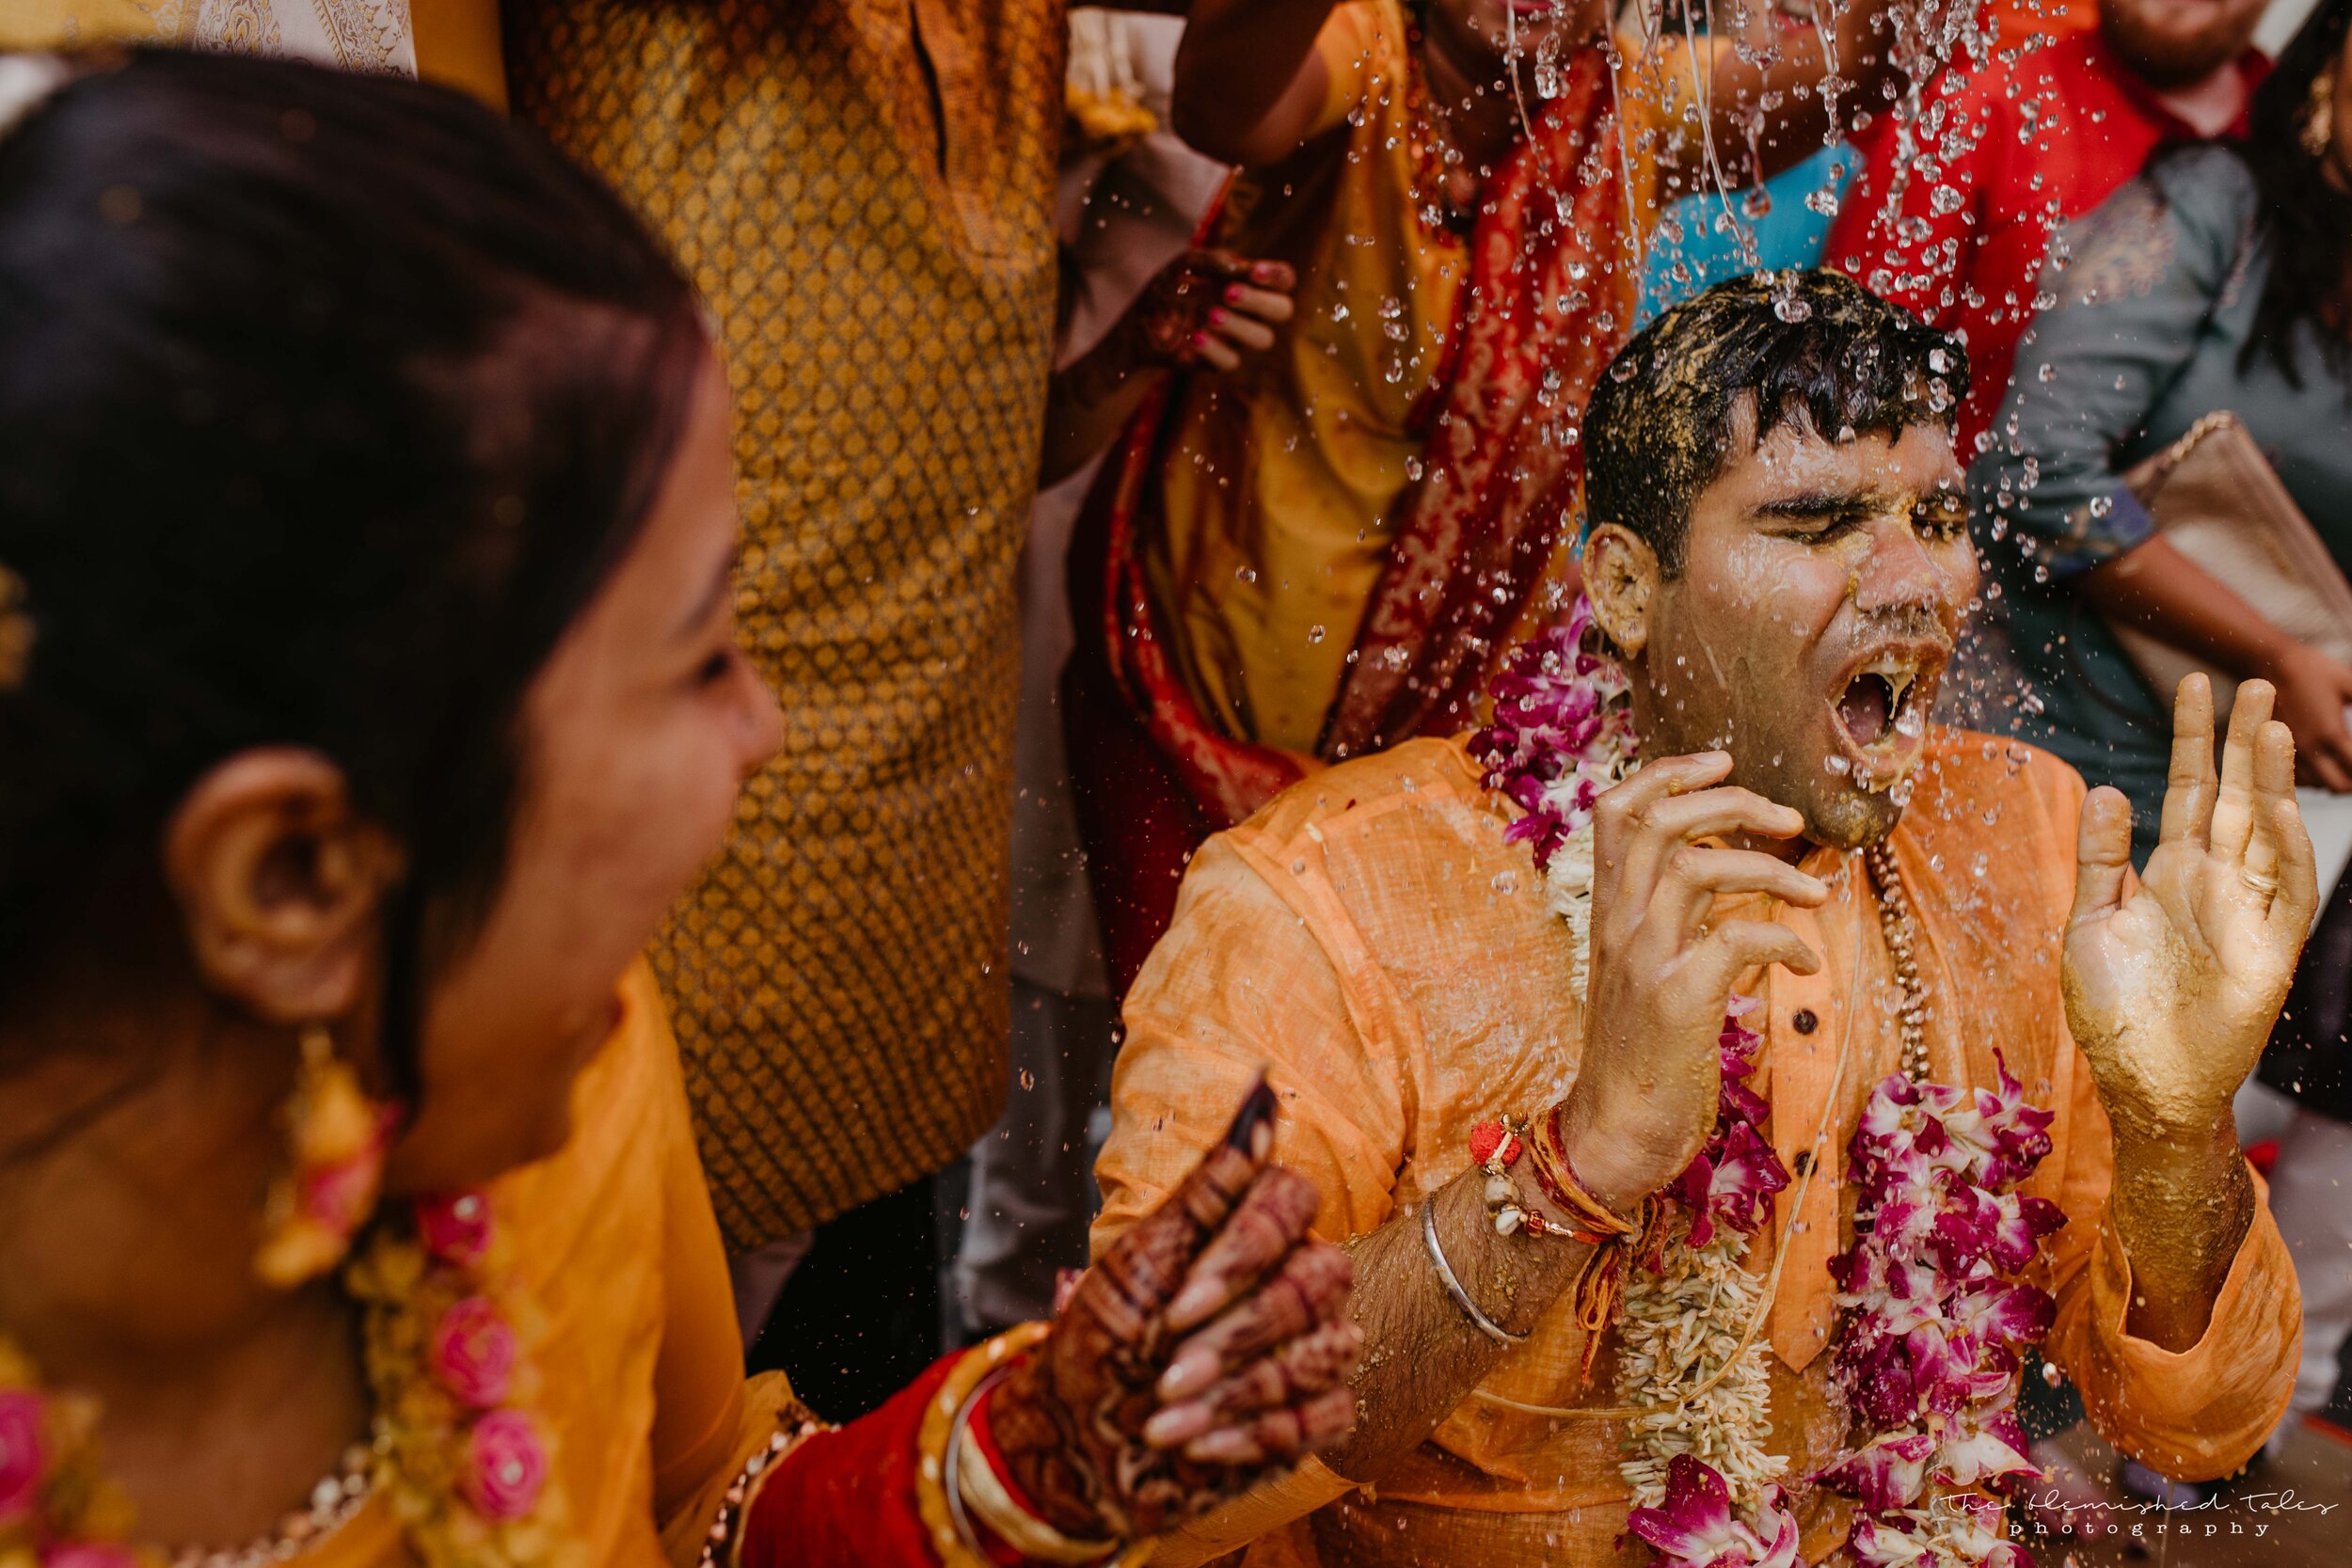 Winter weddings and Mangal Snanam don't go hand in hand